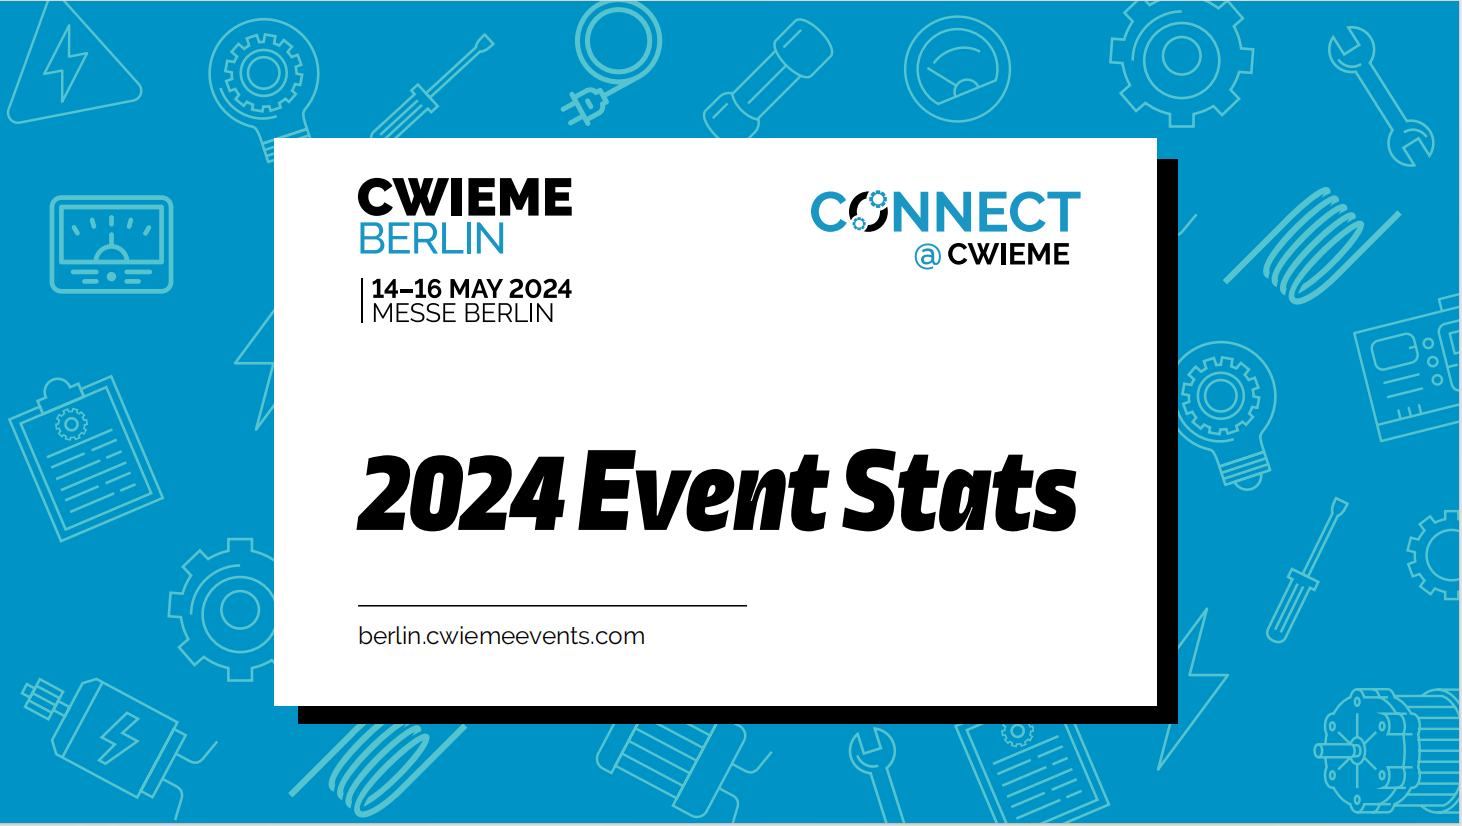 Shanghai King-nd Magnet Sincerely Invite You To CWIEME Berlin 2024,the global coil winding and electrical manufacturing event